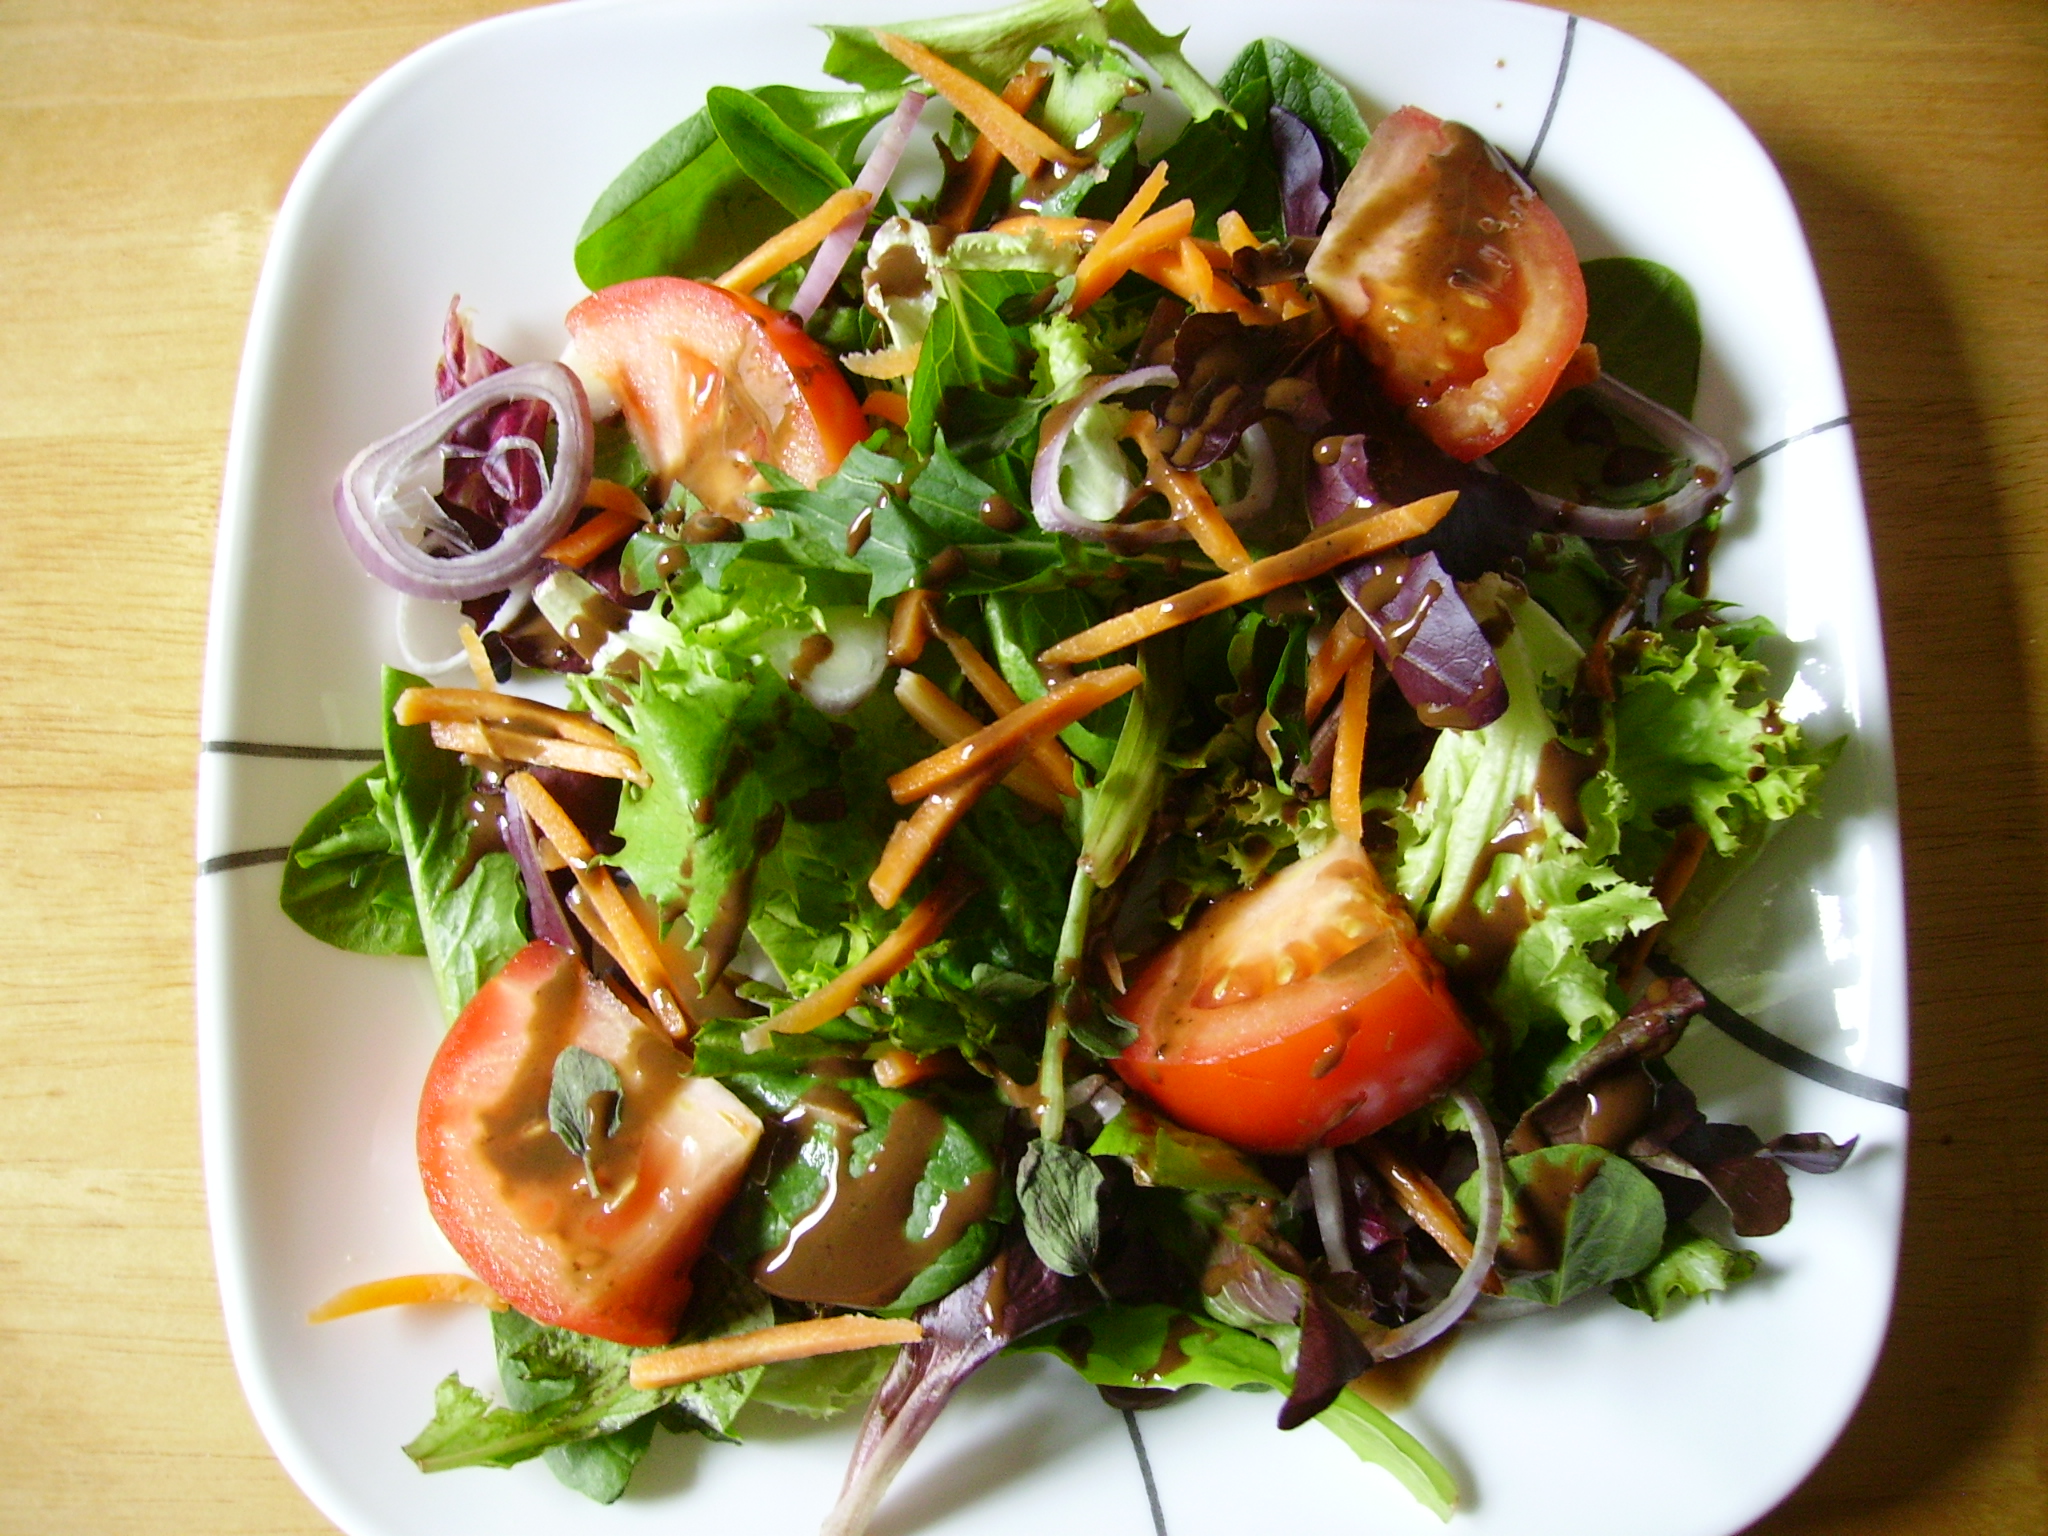 http://165.227.85.225/wp-content/uploads/2011/04/simple-spring-mix-salad.jpg